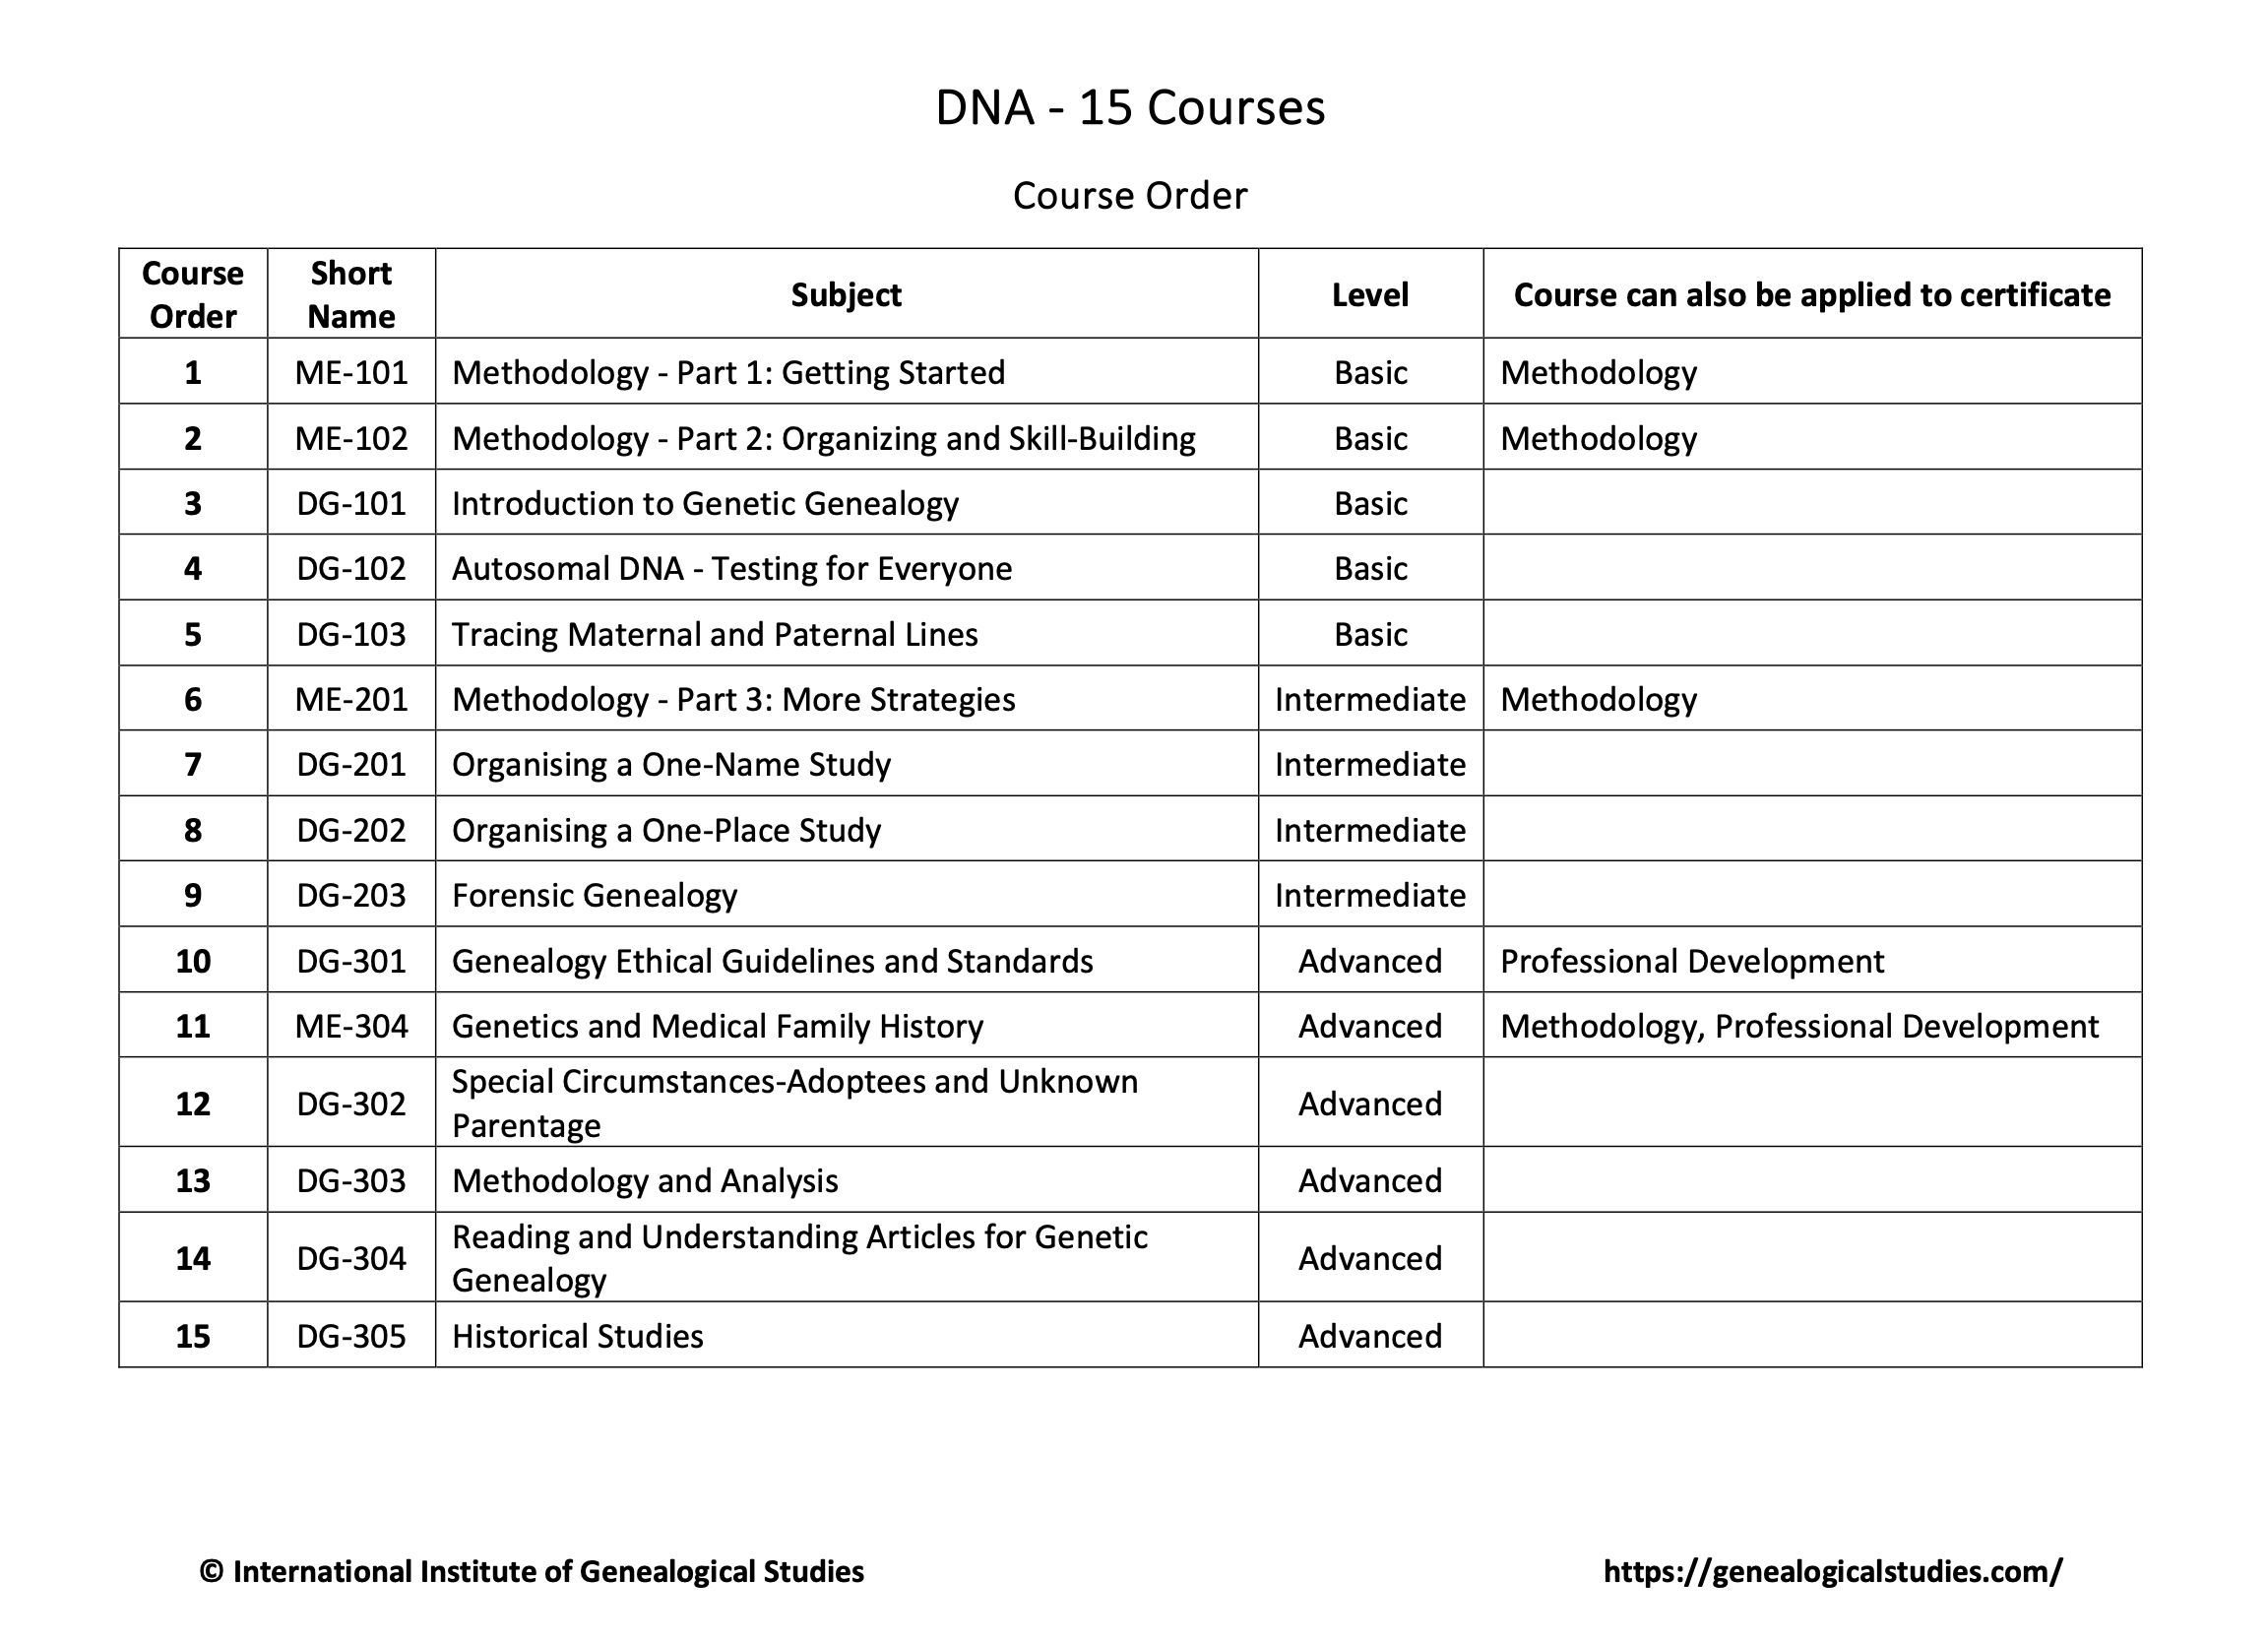 DNA and Genetic certificate course order